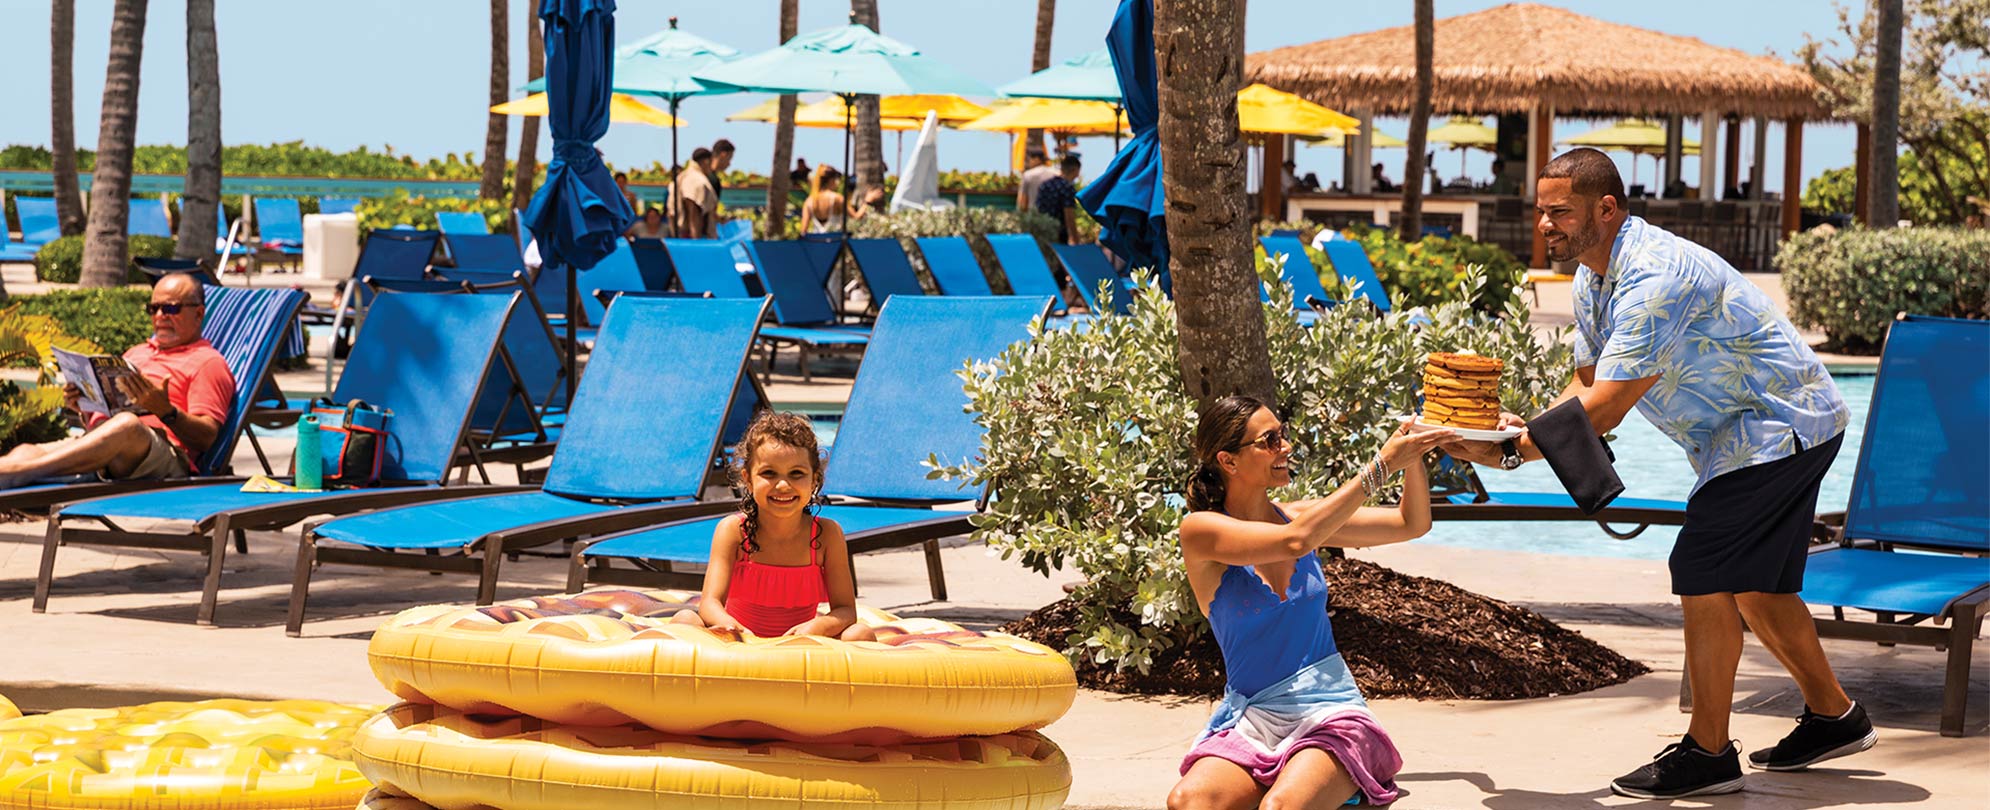 A server hands a mom a plate of food while she sits on the edge of a resort pool, next to her daughter on pool floats.